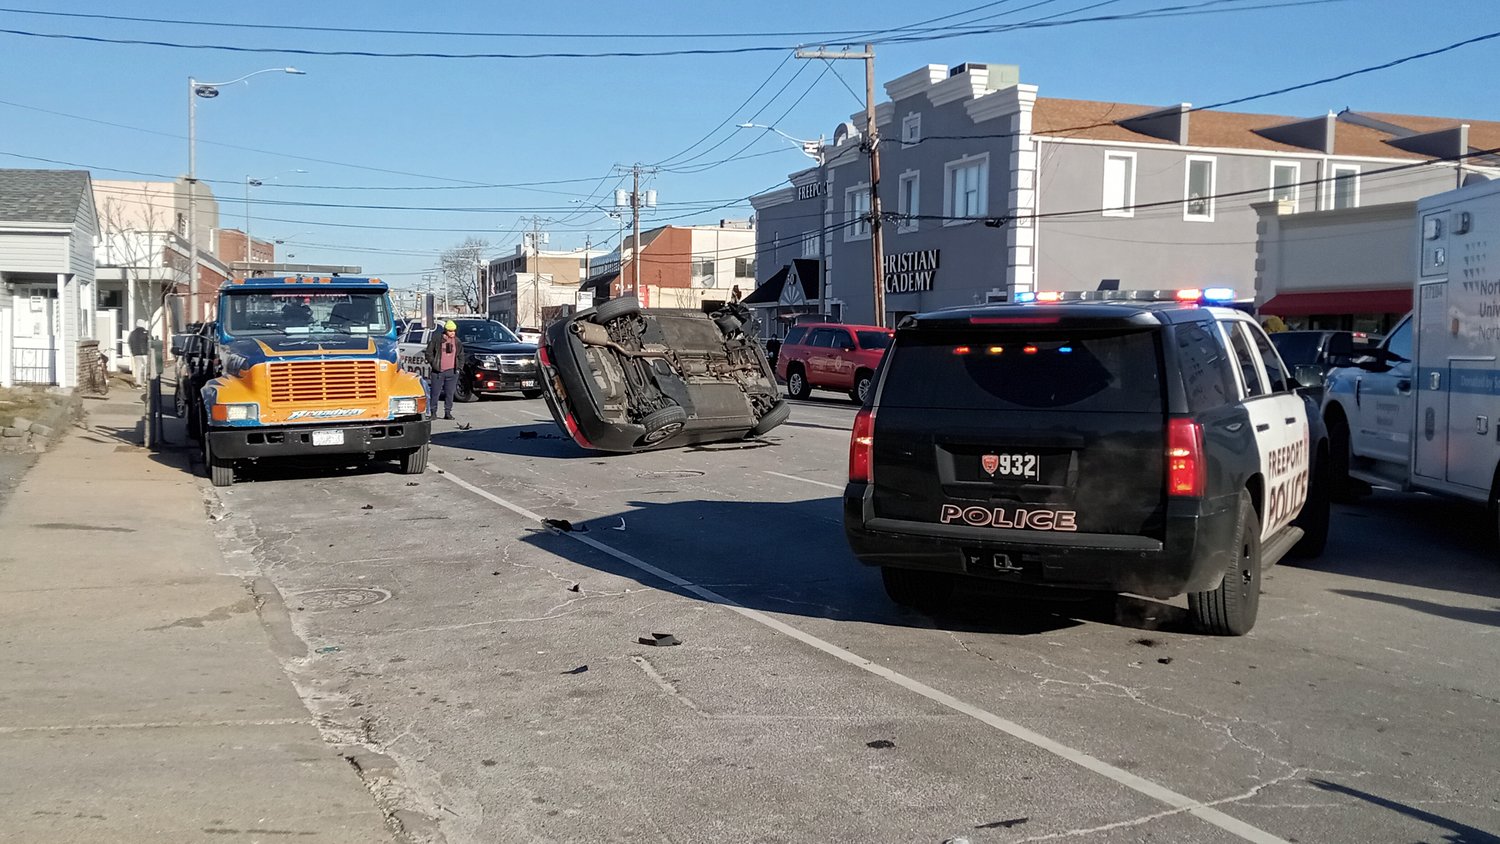 Freeport police responded on Saturday morning, Jan. 22, when called to a collision between a tow truck, left, and an SUV, which flipped onto one side.